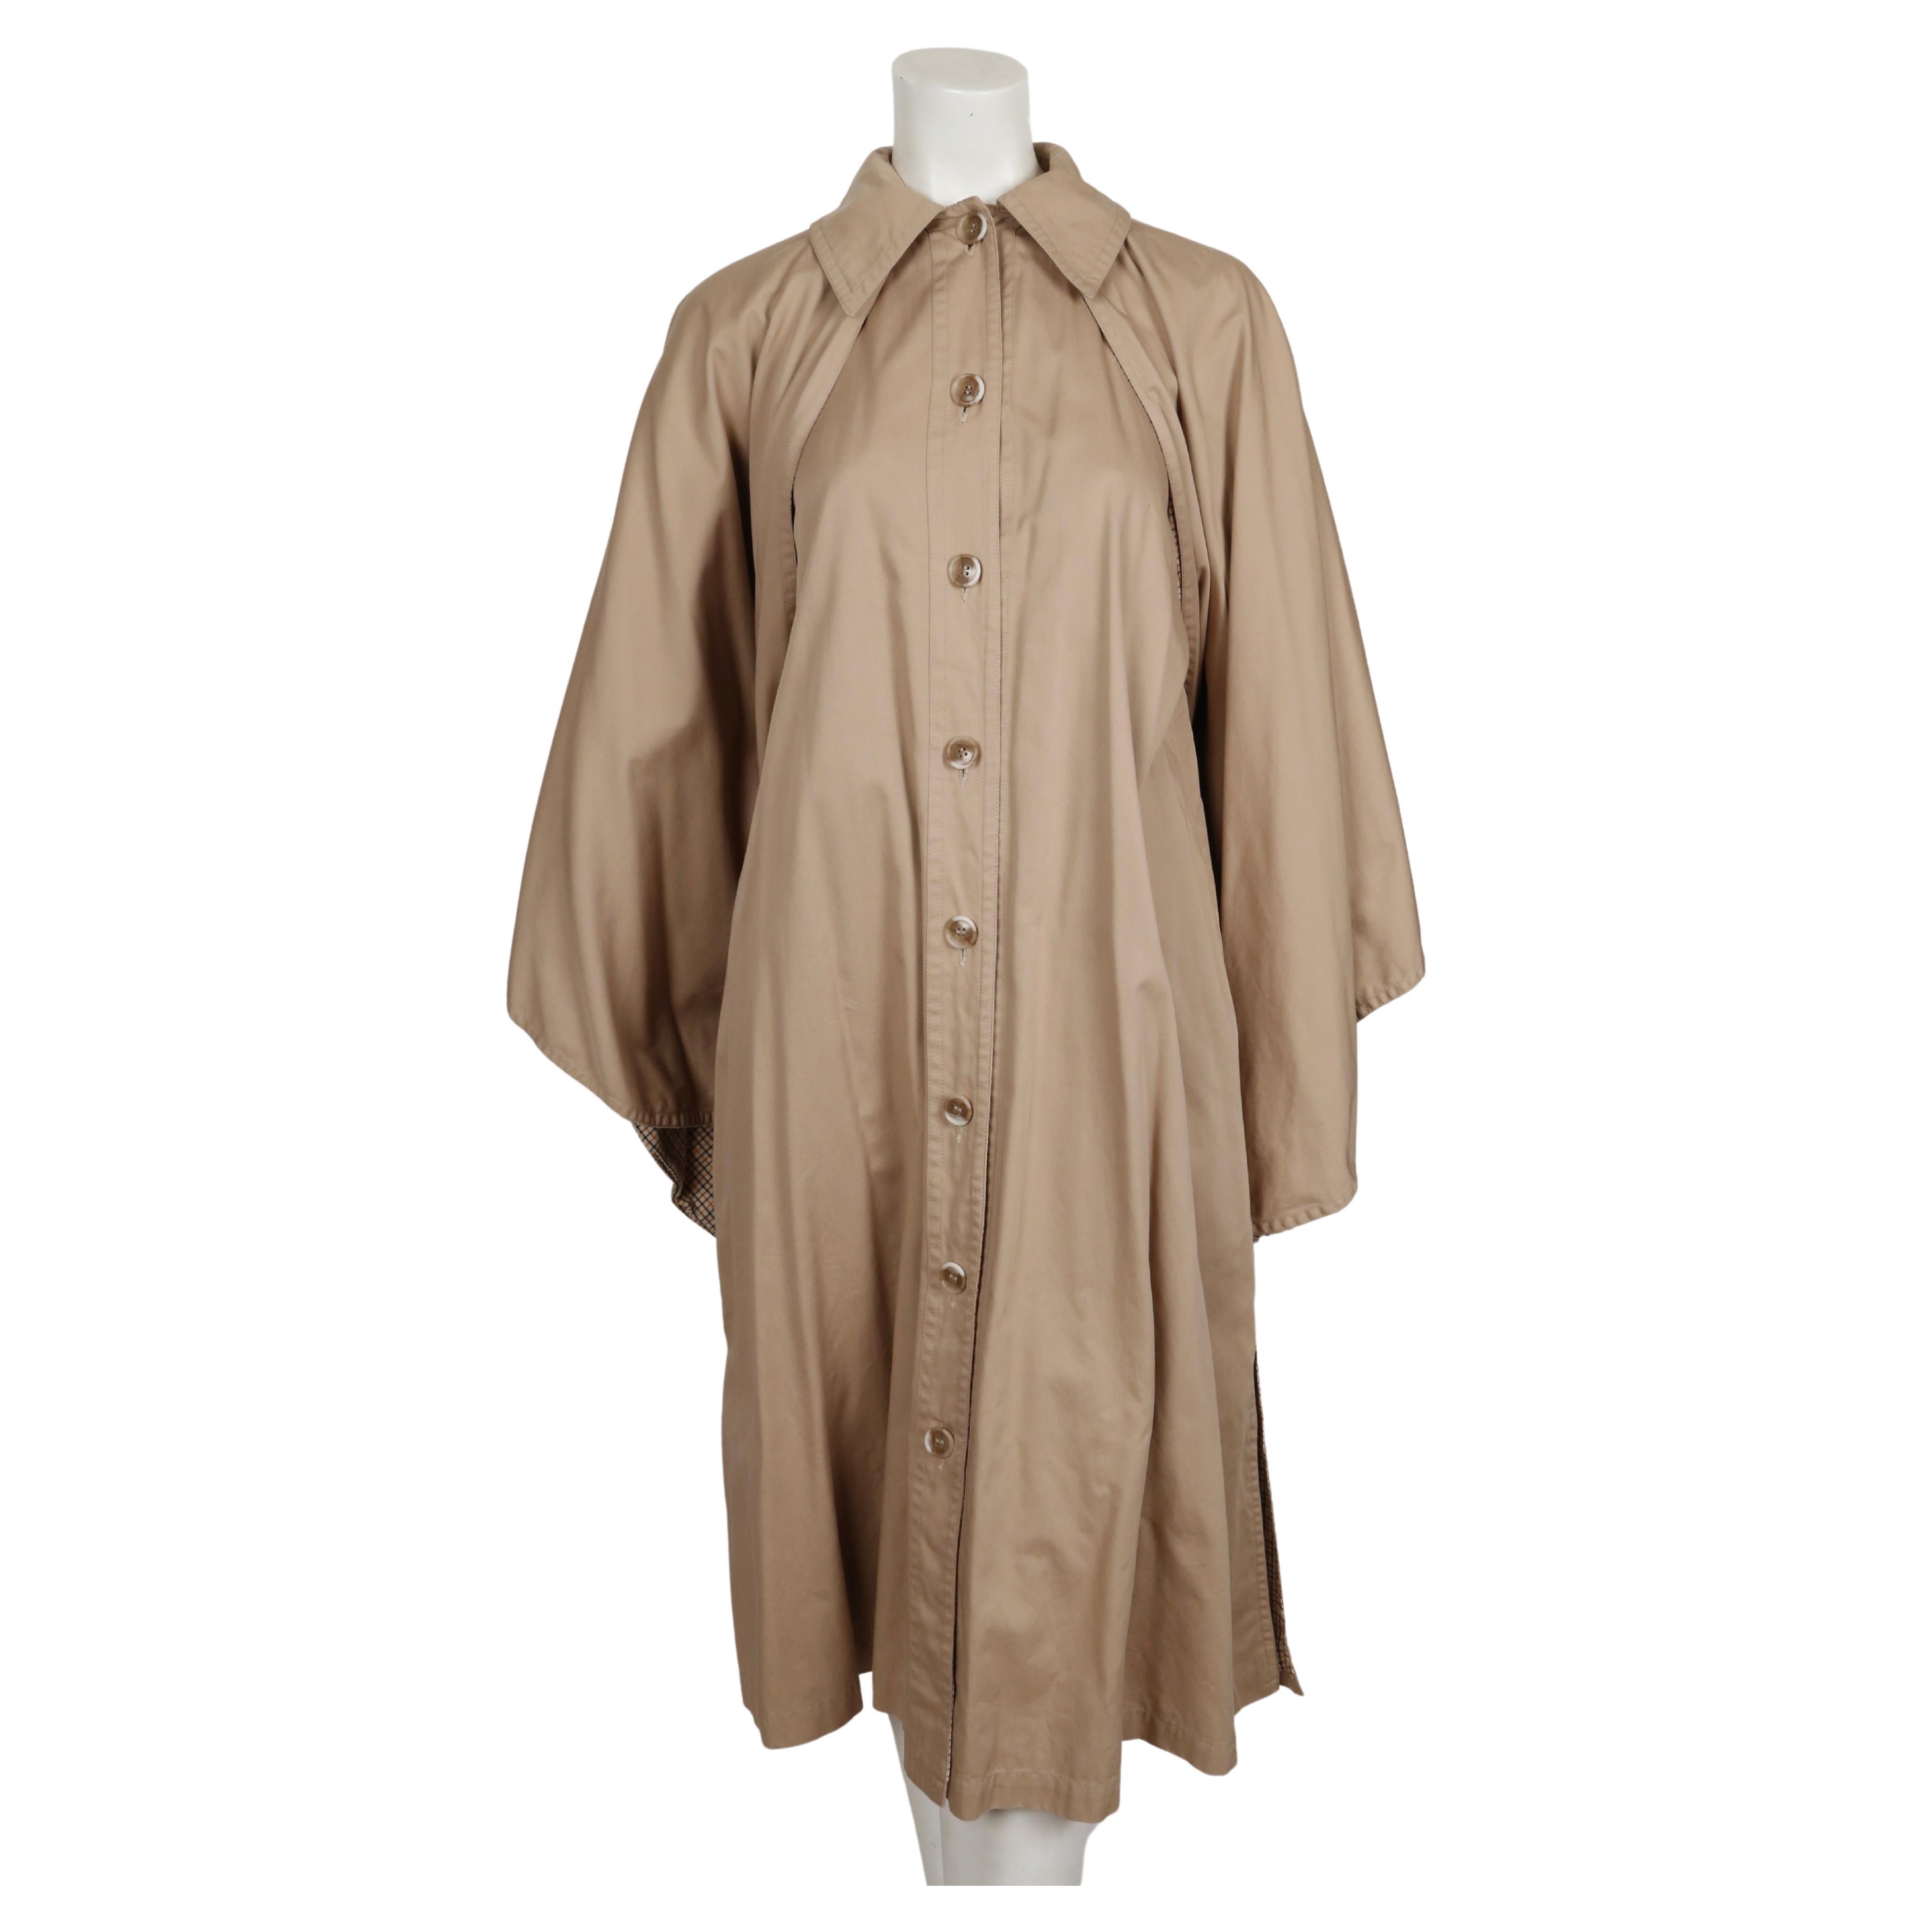 Tan, cotton poplin trench coat with cape designed by Yves Saint Laurent dating to the early 1970's. No size is indicated however this fits many sizes due to the loose cut. Approximate measurements:  bust 38